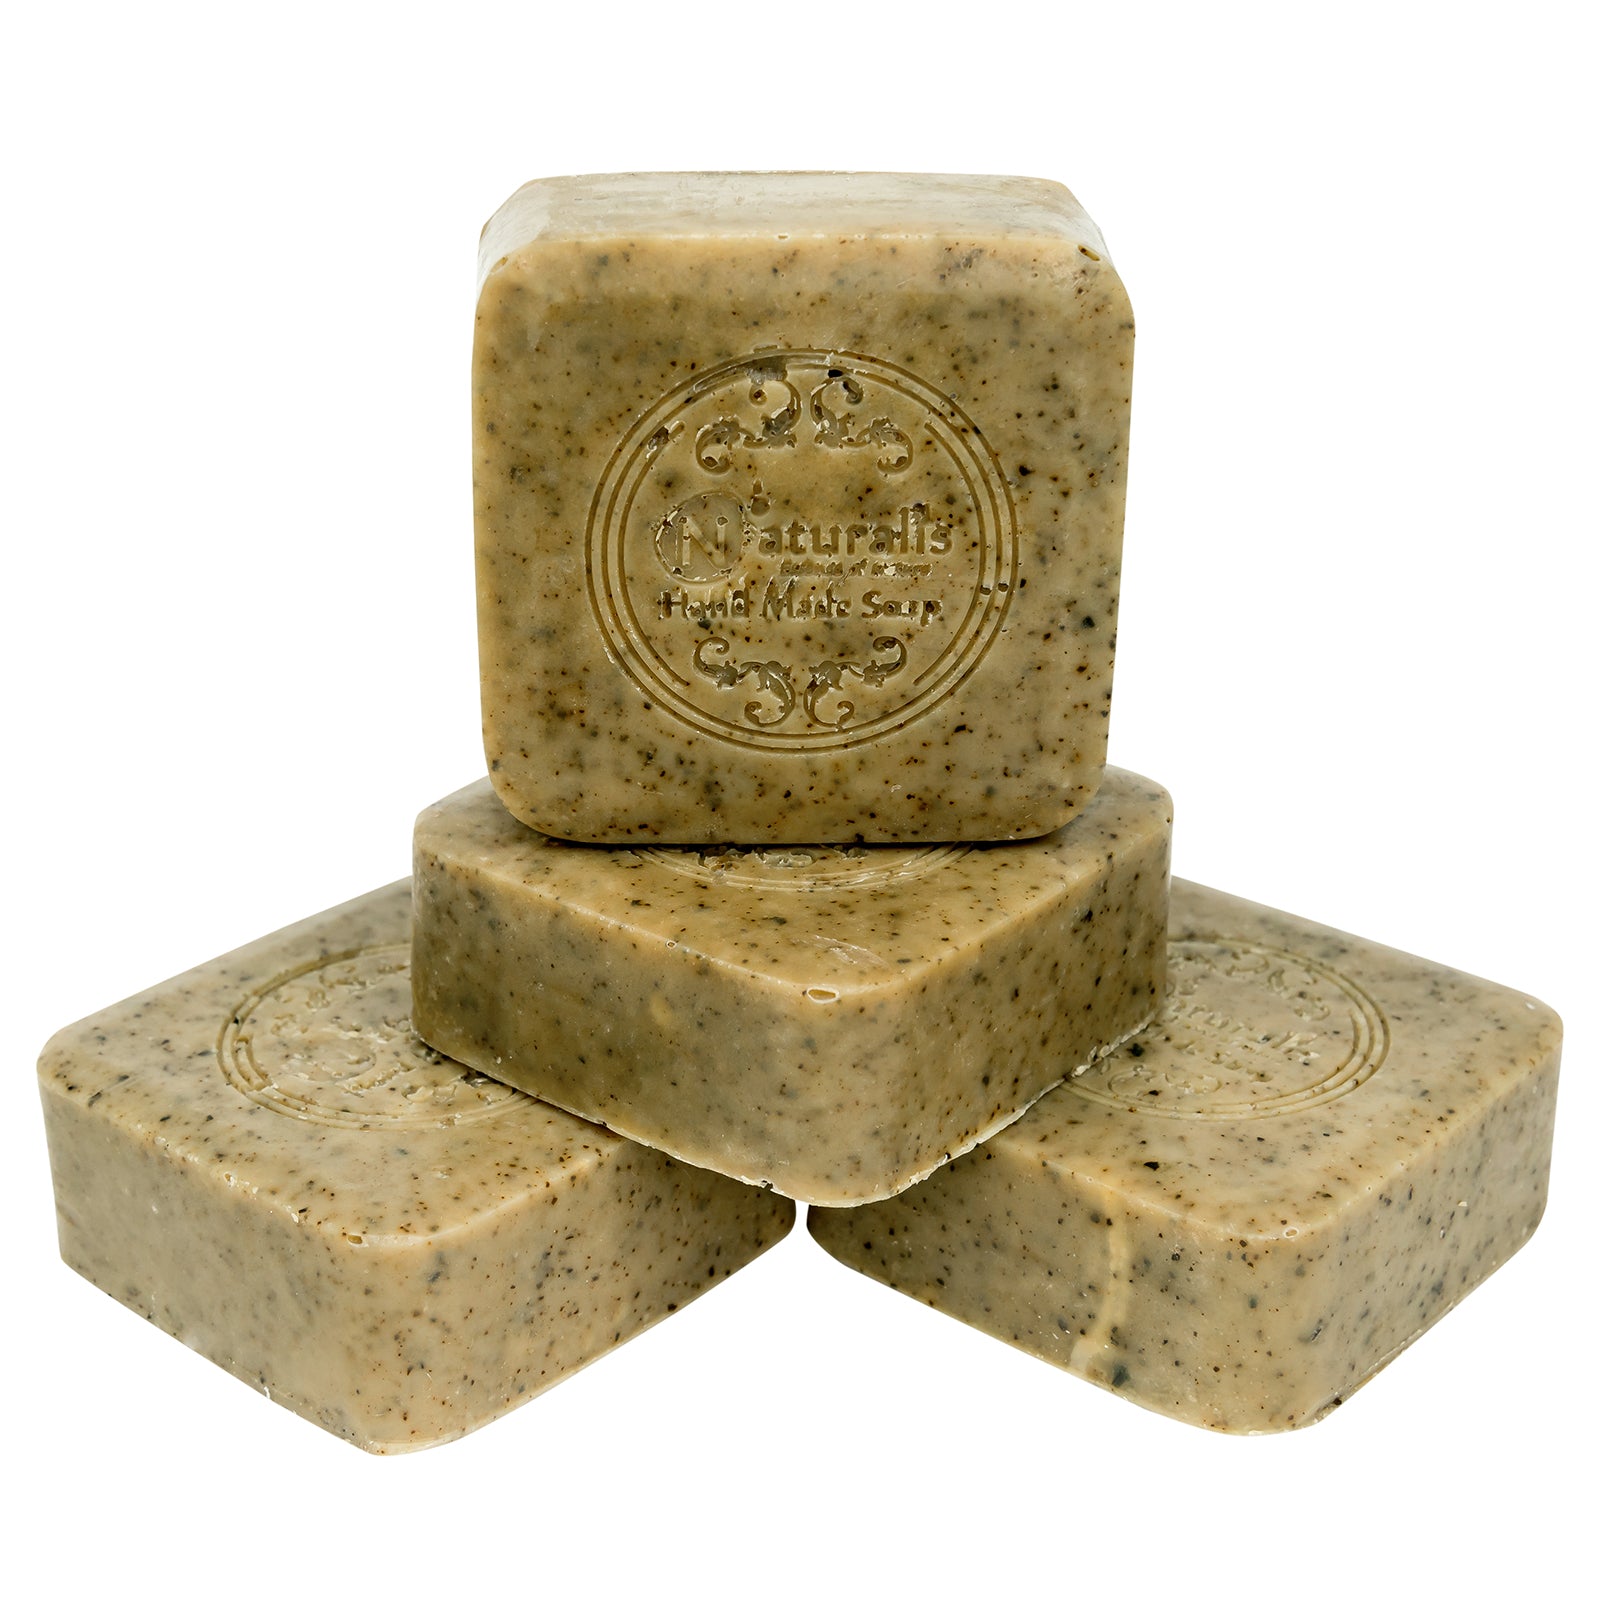 Hand-Milled Luxury Neem Solid Soap Bar, Made using century-old Cold Process Method - 100gms Pack of 4